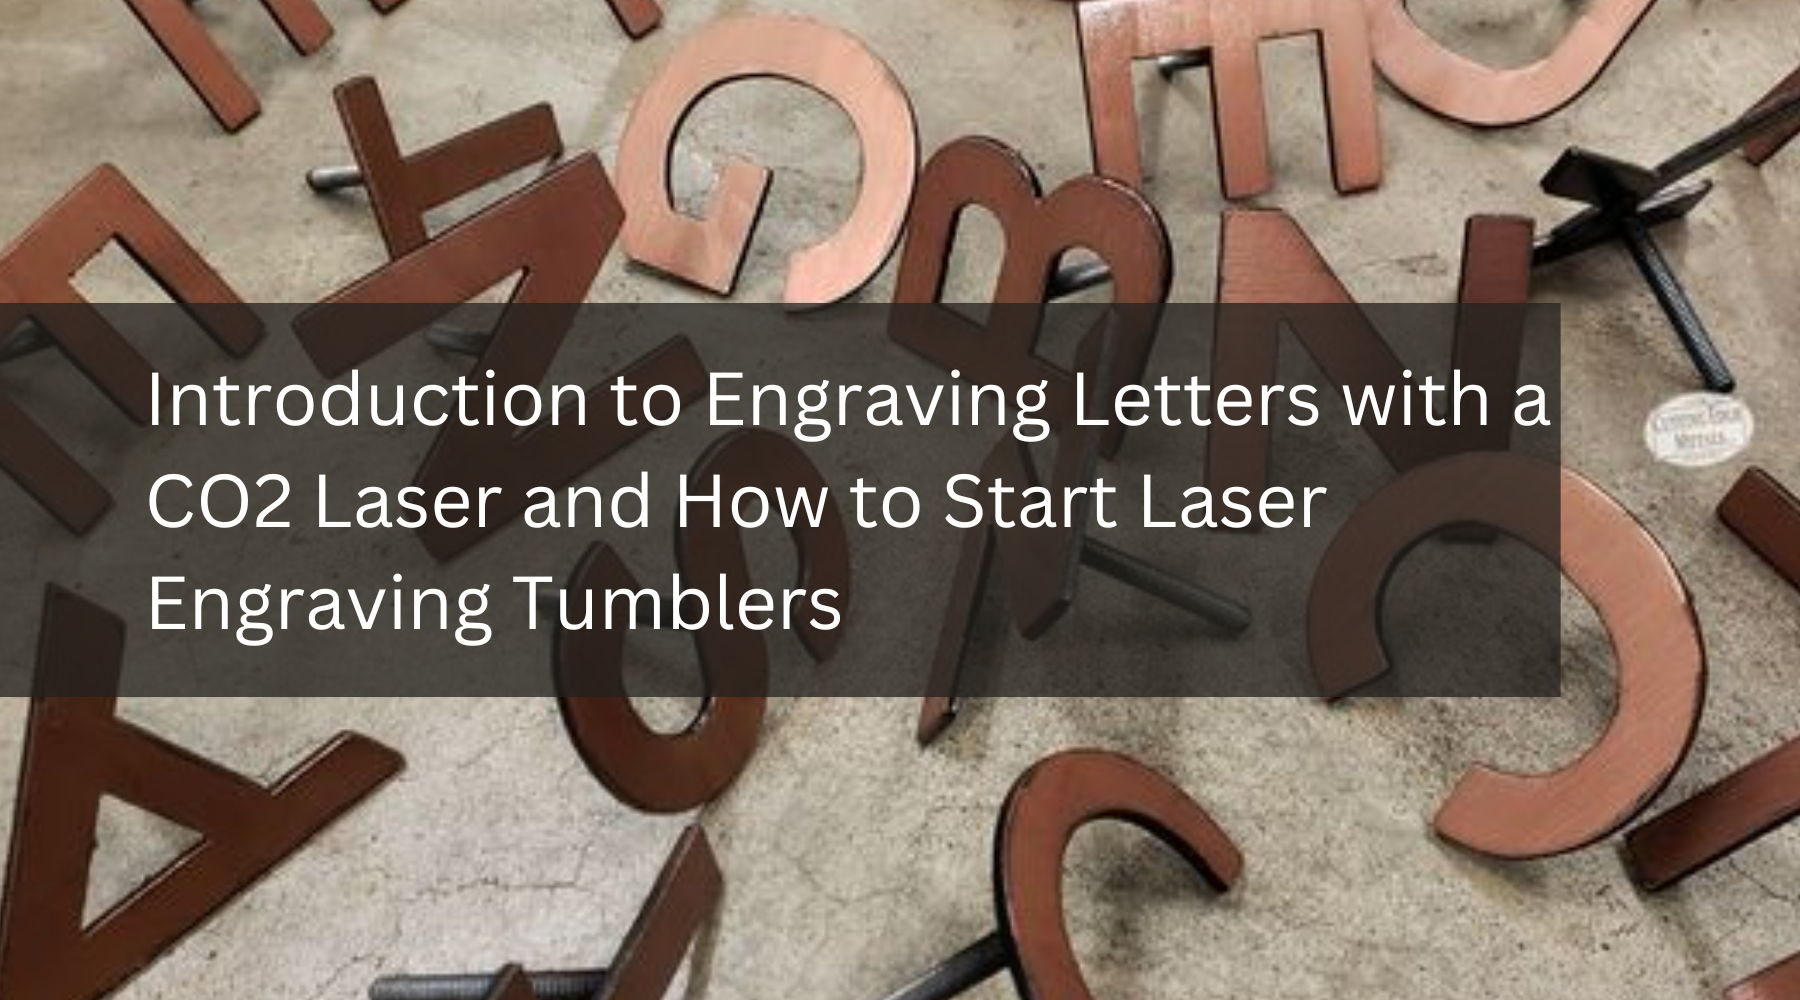 Introduction to Engraving Letters with a CO2 Laser and How to Start Laser Engraving Tumblers